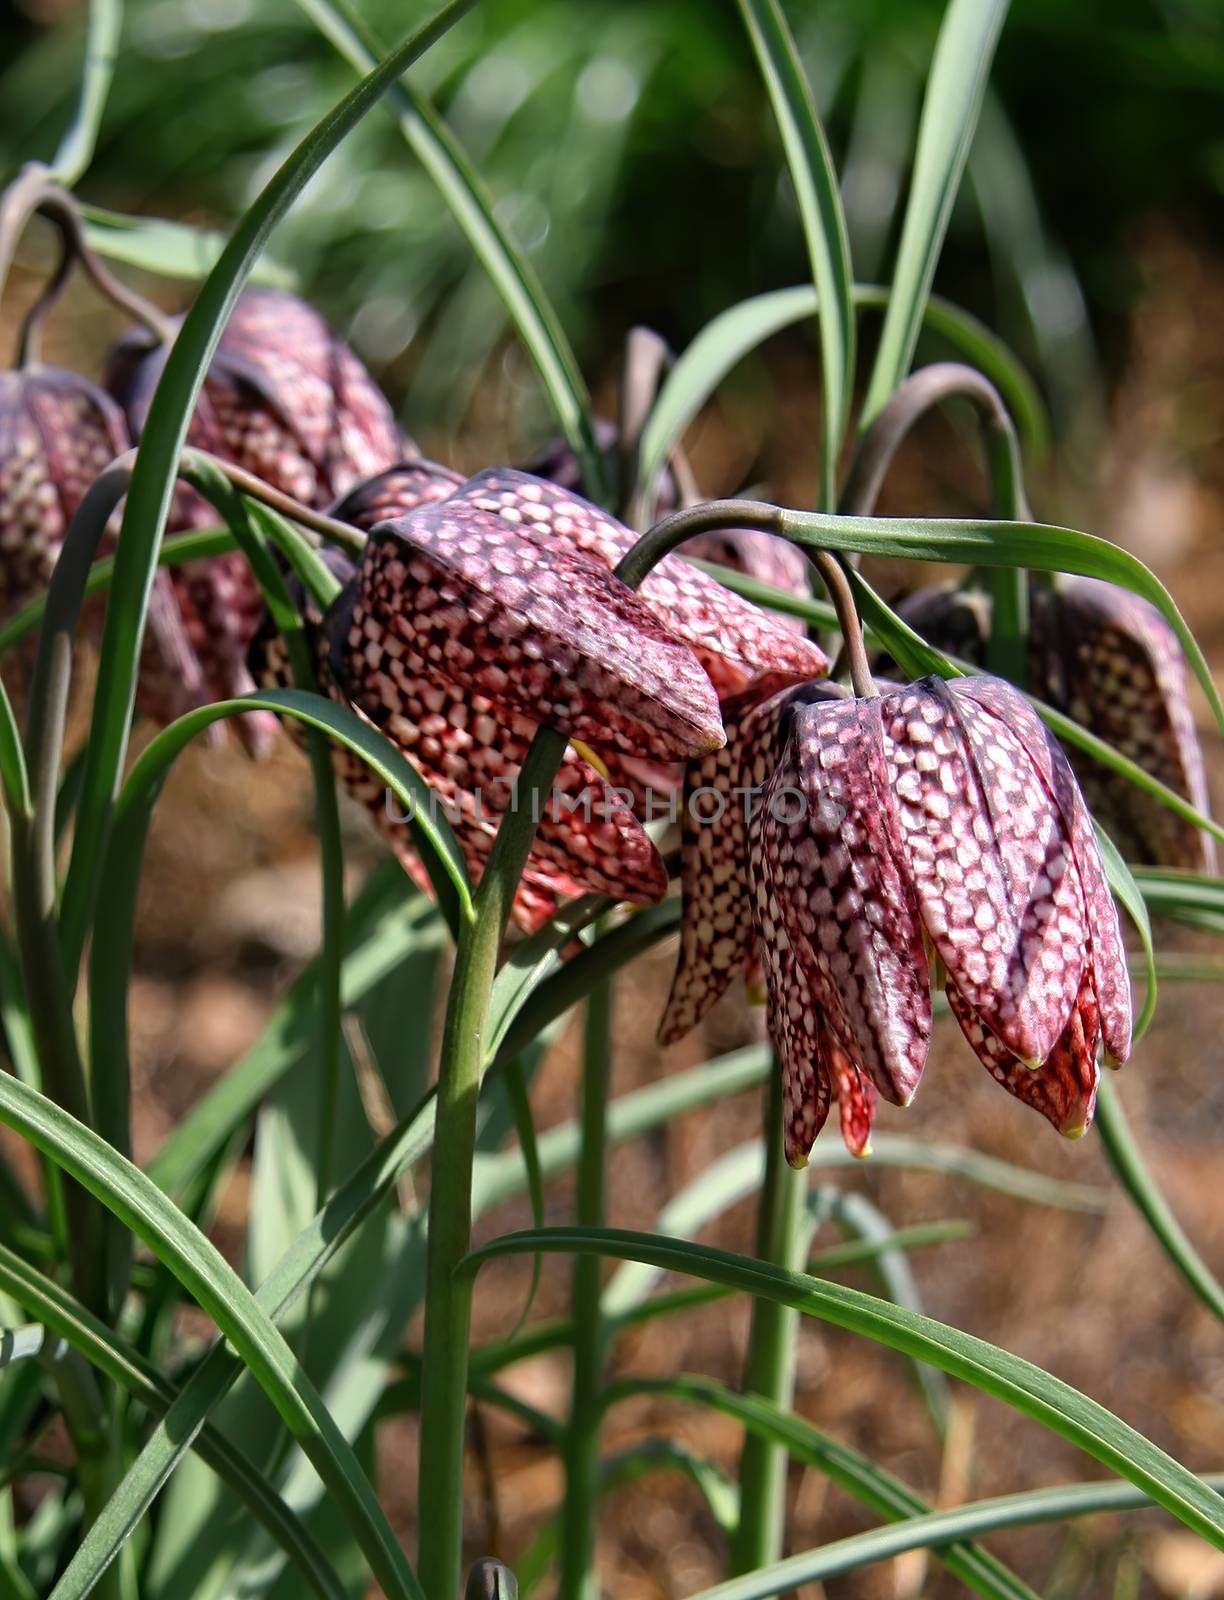 The checkerboard Fritillaria, Fritillaria meleagris. Group of flowers with a checkerboard raspberry color by bonilook